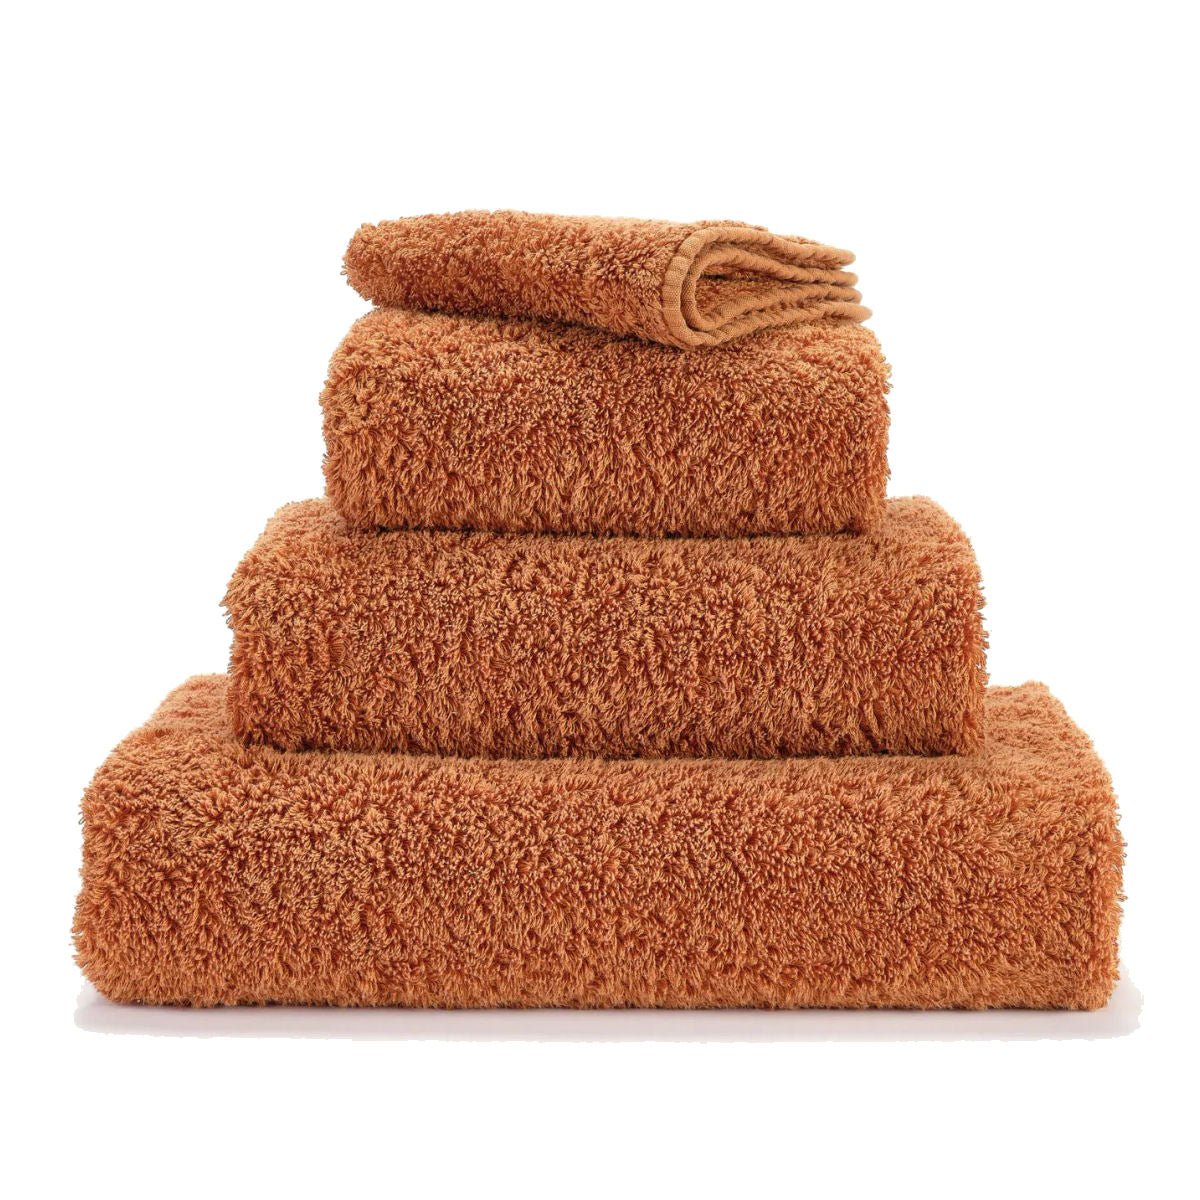 Super Pile Bath Towels by Abyss & Habidecor | 737 Caramel - |VESIMI Design| Luxury and Rustic bathrooms online